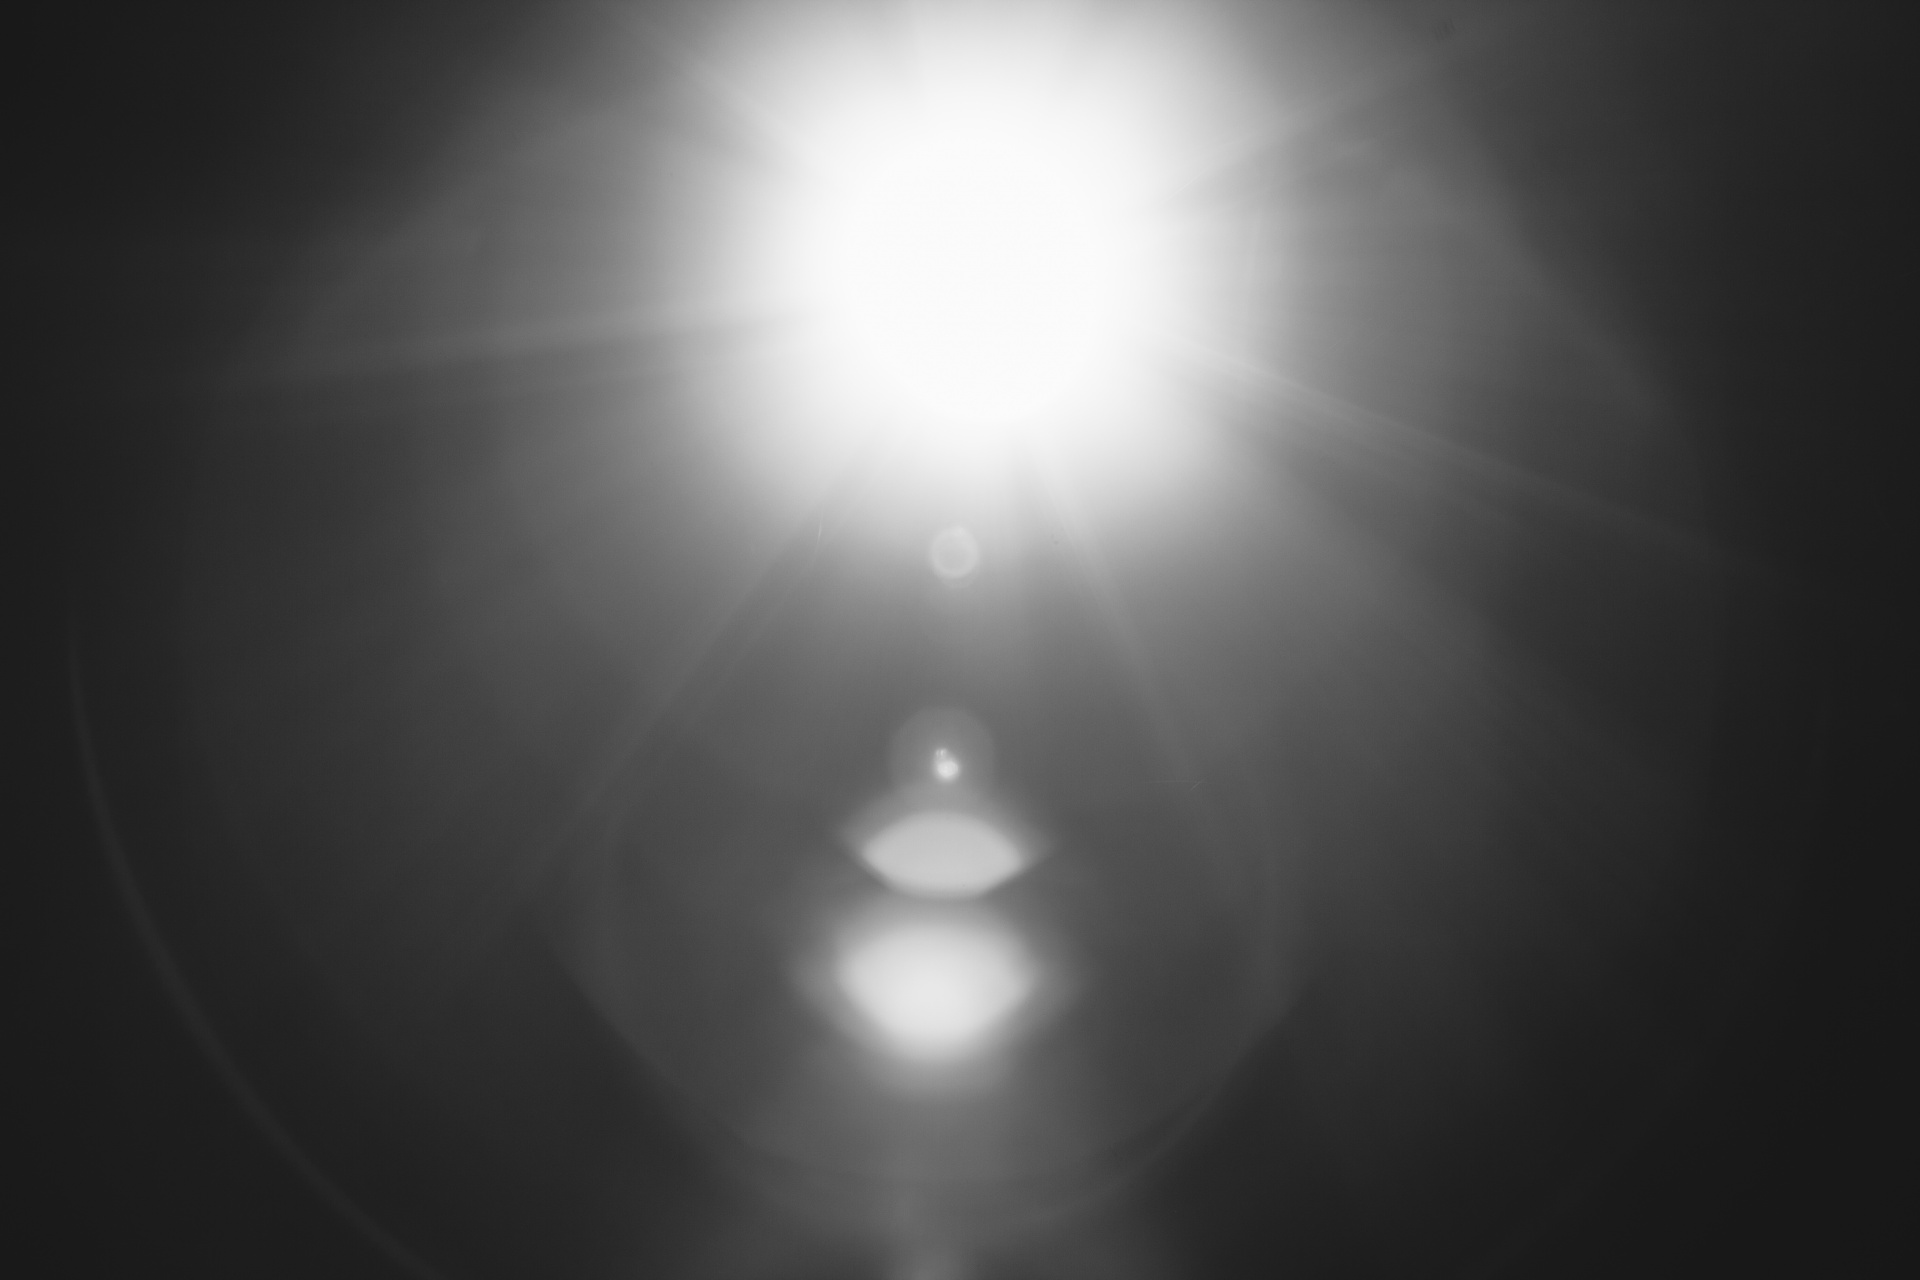 Download free photo of Black white,light,lens flare,darkness